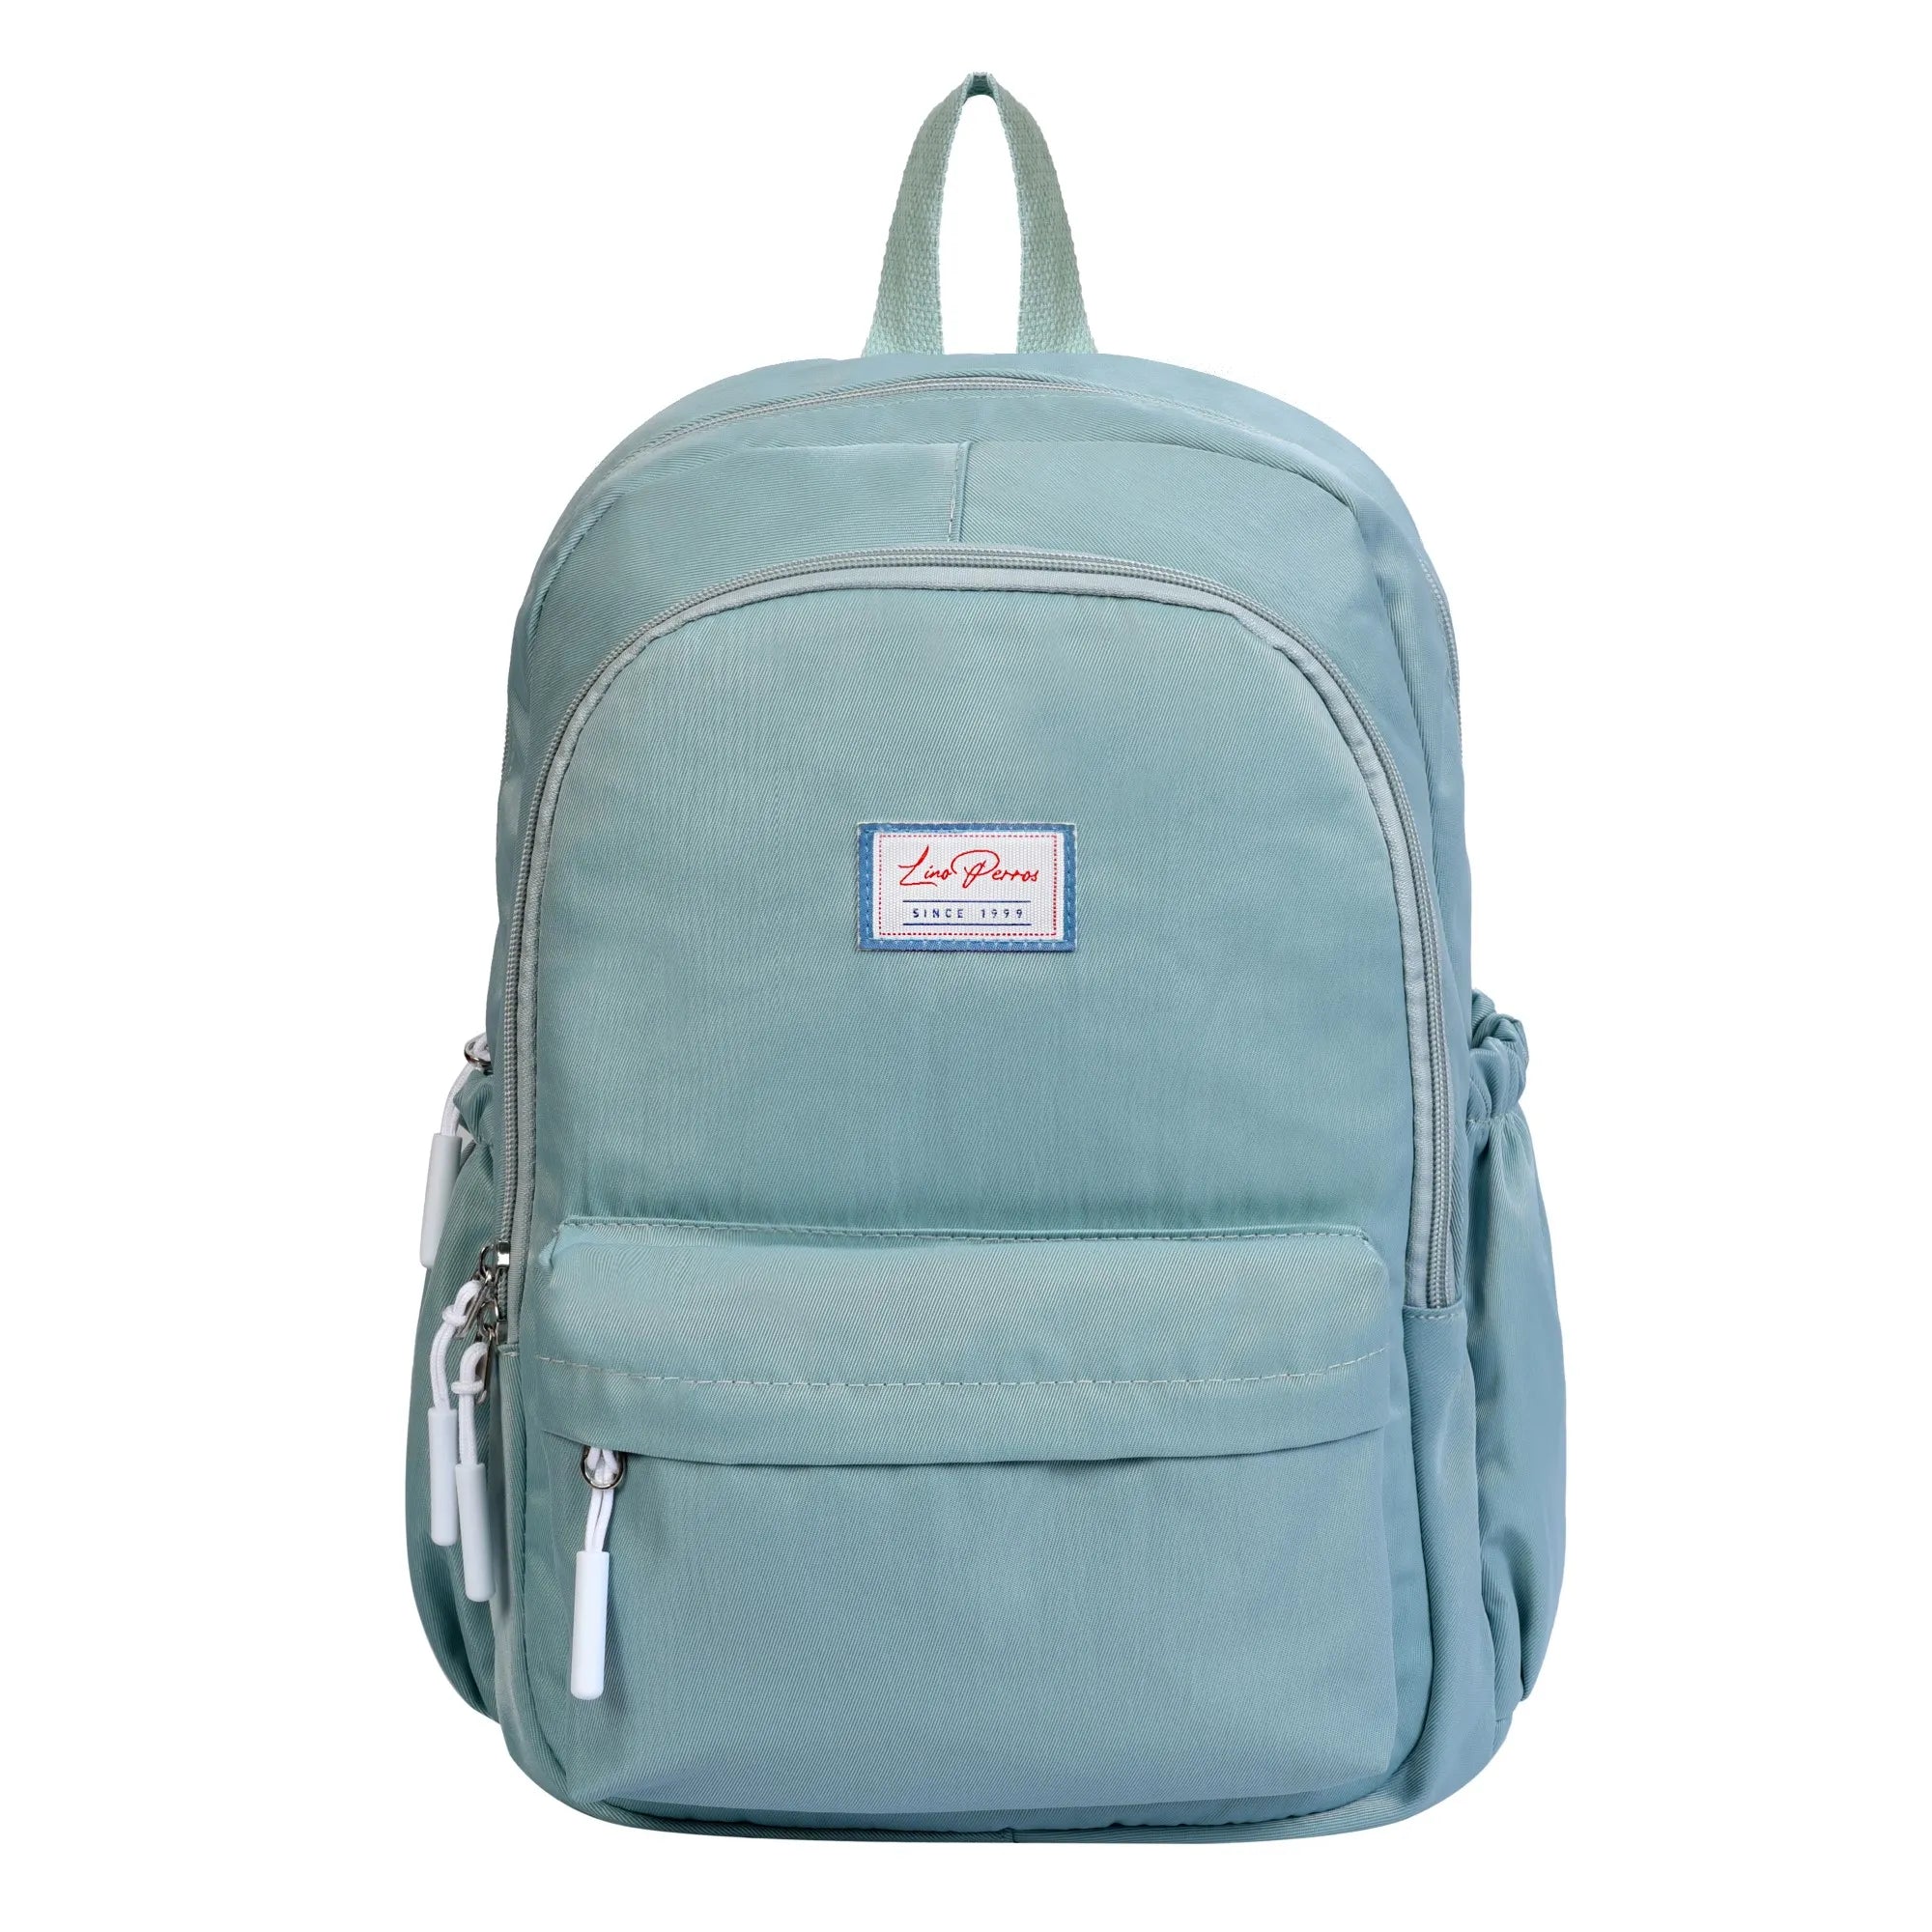 Kids School Backpack Cute Cat Ear Classic Bag Large Size Light Weight  Colorful Blue Bag For Girl - China Wholesale School Bags $10.13 from  Guangzhou Kingslong Bag & Case Co. Ltd | Globalsources.com